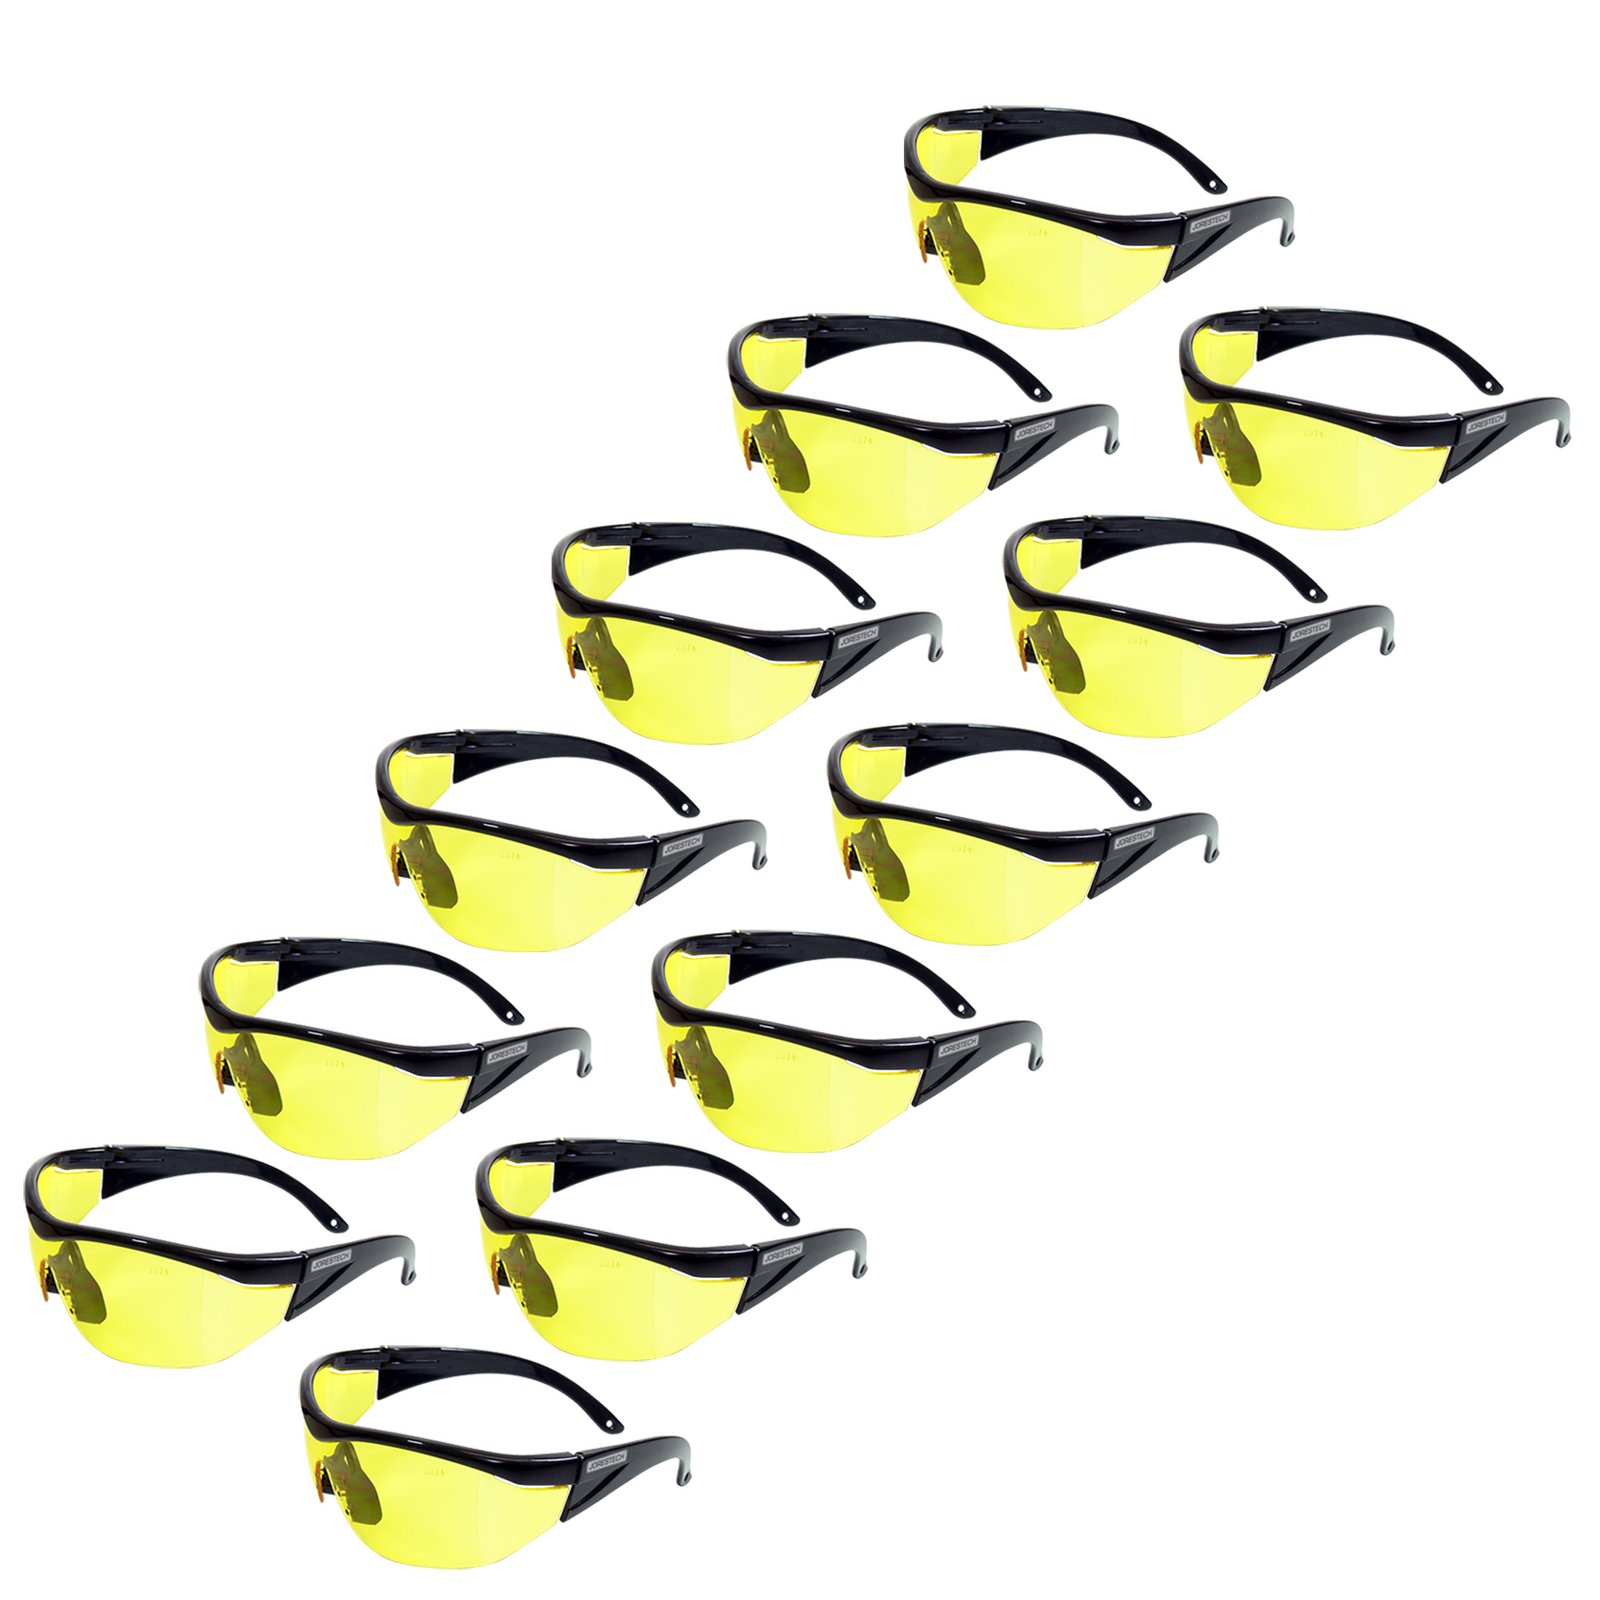 12 modern design framed JORESTECH safety yellow glasses with side shields for high impact protection. There is a embedder mark of the polycarbonate glass that reads Z87+ which is the ANSI standard